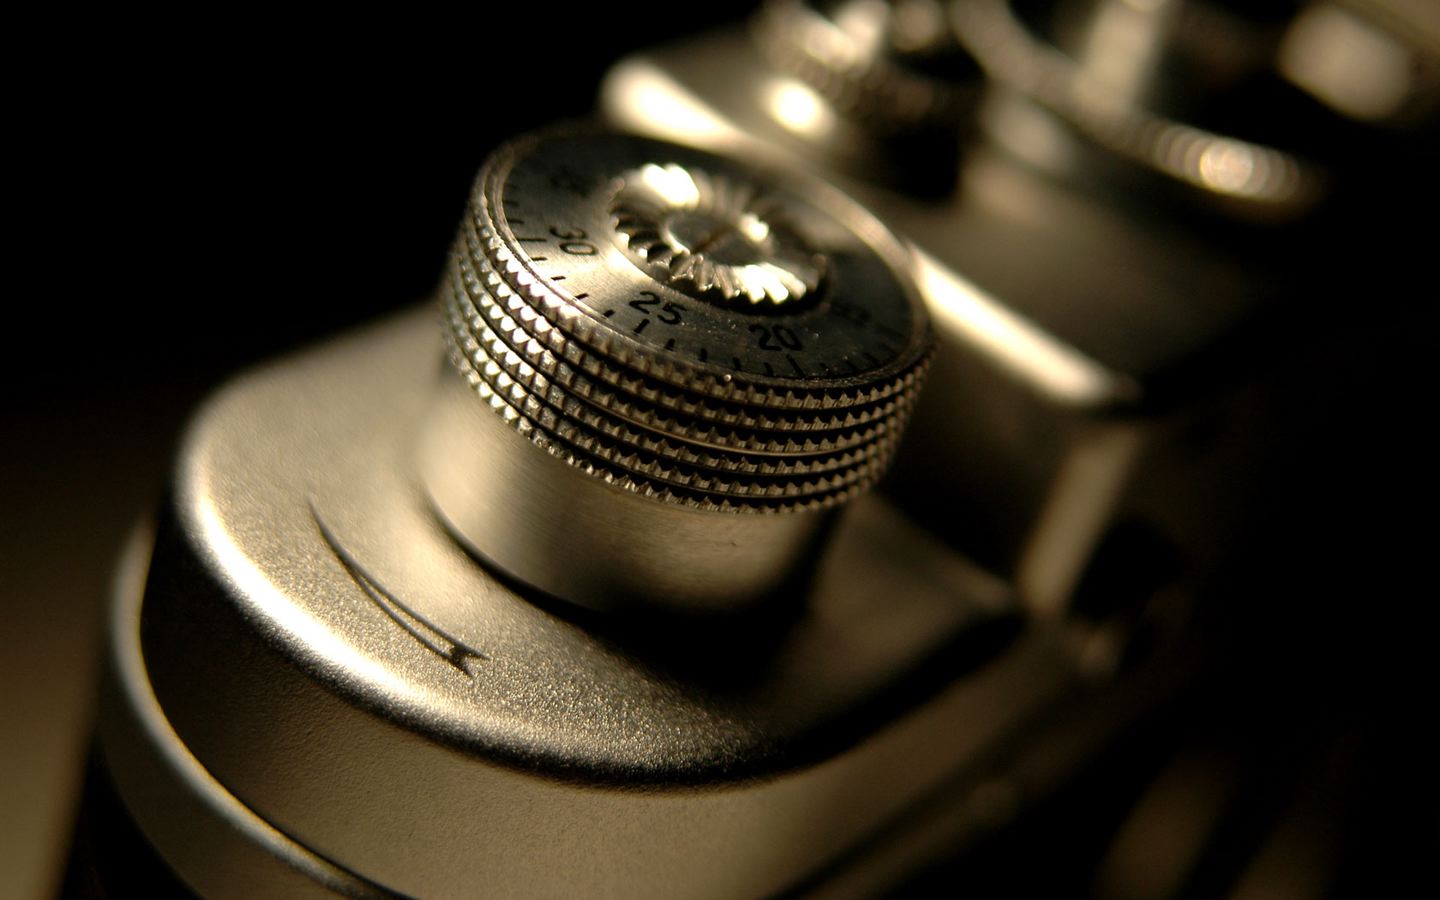 Previous Photography Wallpaper - Macro Photography Old Cameras , HD Wallpaper & Backgrounds